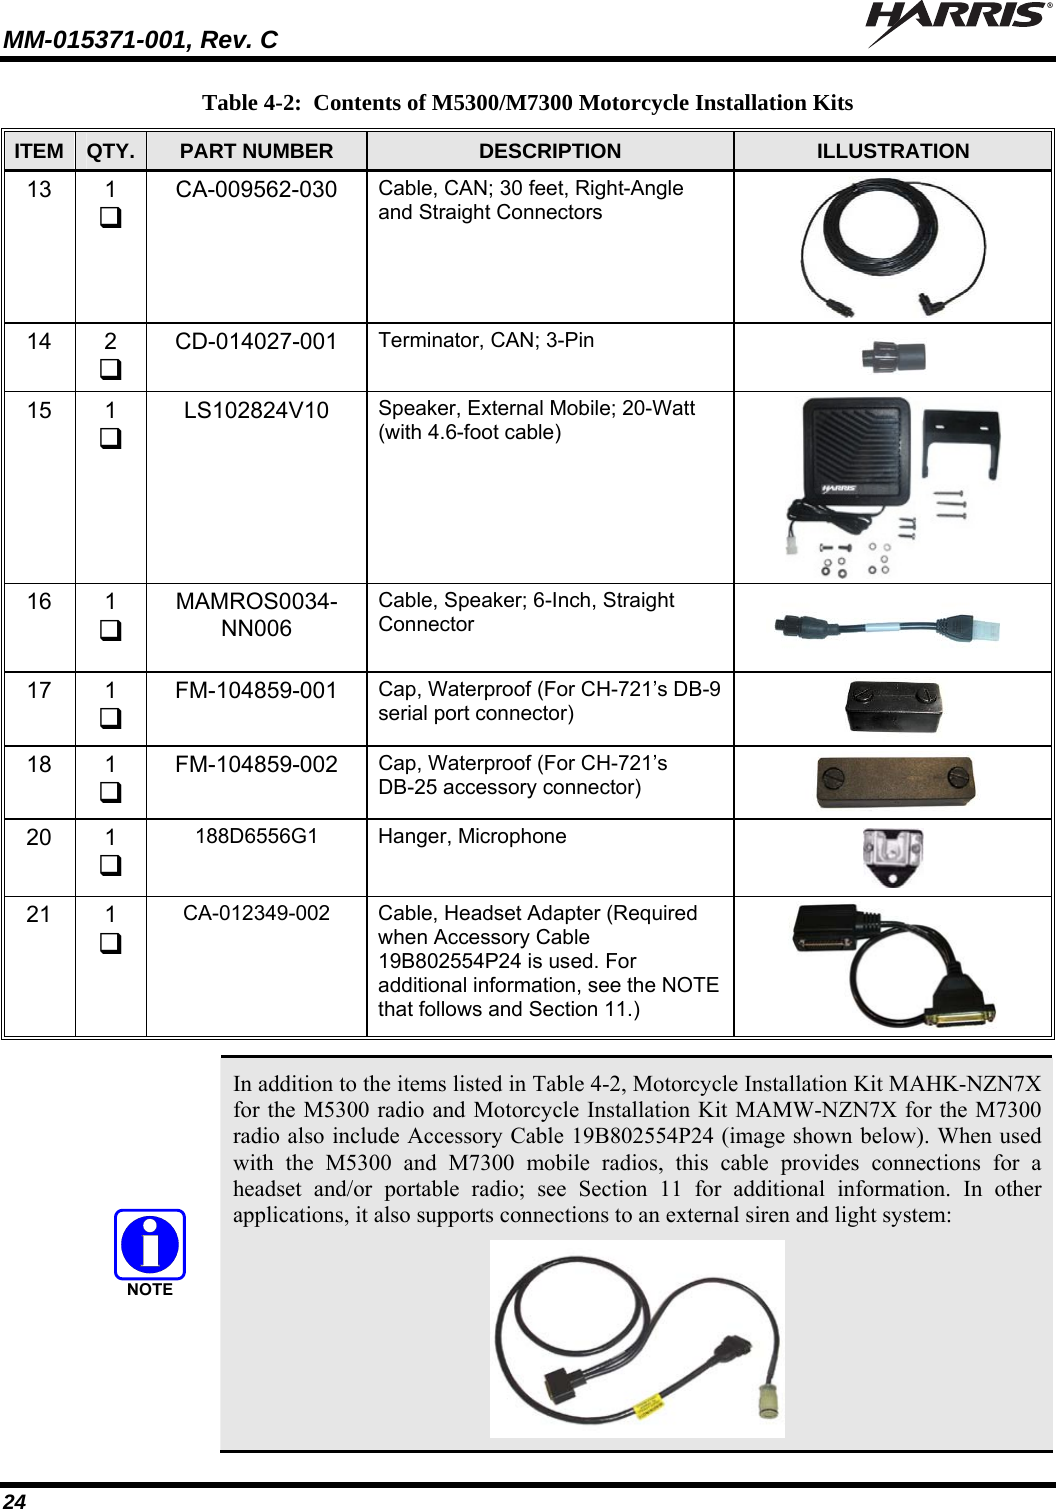 MM-015371-001, Rev. C   24 Table 4-2:  Contents of M5300/M7300 Motorcycle Installation Kits ITEM  QTY.  PART NUMBER  DESCRIPTION  ILLUSTRATION 13 1  CA-009562-030  Cable, CAN; 30 feet, Right-Angle and Straight Connectors  14 2  CD-014027-001  Terminator, CAN; 3-Pin       15 1  LS102824V10  Speaker, External Mobile; 20-Watt (with 4.6-foot cable)  16 1  MAMROS0034-NN006 Cable, Speaker; 6-Inch, Straight Connector  17 1  FM-104859-001  Cap, Waterproof (For CH-721’s DB-9 serial port connector)  18 1  FM-104859-002  Cap, Waterproof (For CH-721’s DB-25 accessory connector)  20 1  188D6556G1 Hanger, Microphone  21 1  CA-012349-002  Cable, Headset Adapter (Required when Accessory Cable 19B802554P24 is used. For additional information, see the NOTE that follows and Section 11.)     In addition to the items listed in Table 4-2, Motorcycle Installation Kit MAHK-NZN7X for the M5300 radio and Motorcycle Installation Kit MAMW-NZN7X for the M7300 radio also include Accessory Cable 19B802554P24 (image shown below). When used with the M5300 and M7300 mobile radios, this cable provides connections for a headset and/or portable radio; see Section 11 for additional information. In other applications, it also supports connections to an external siren and light system:  